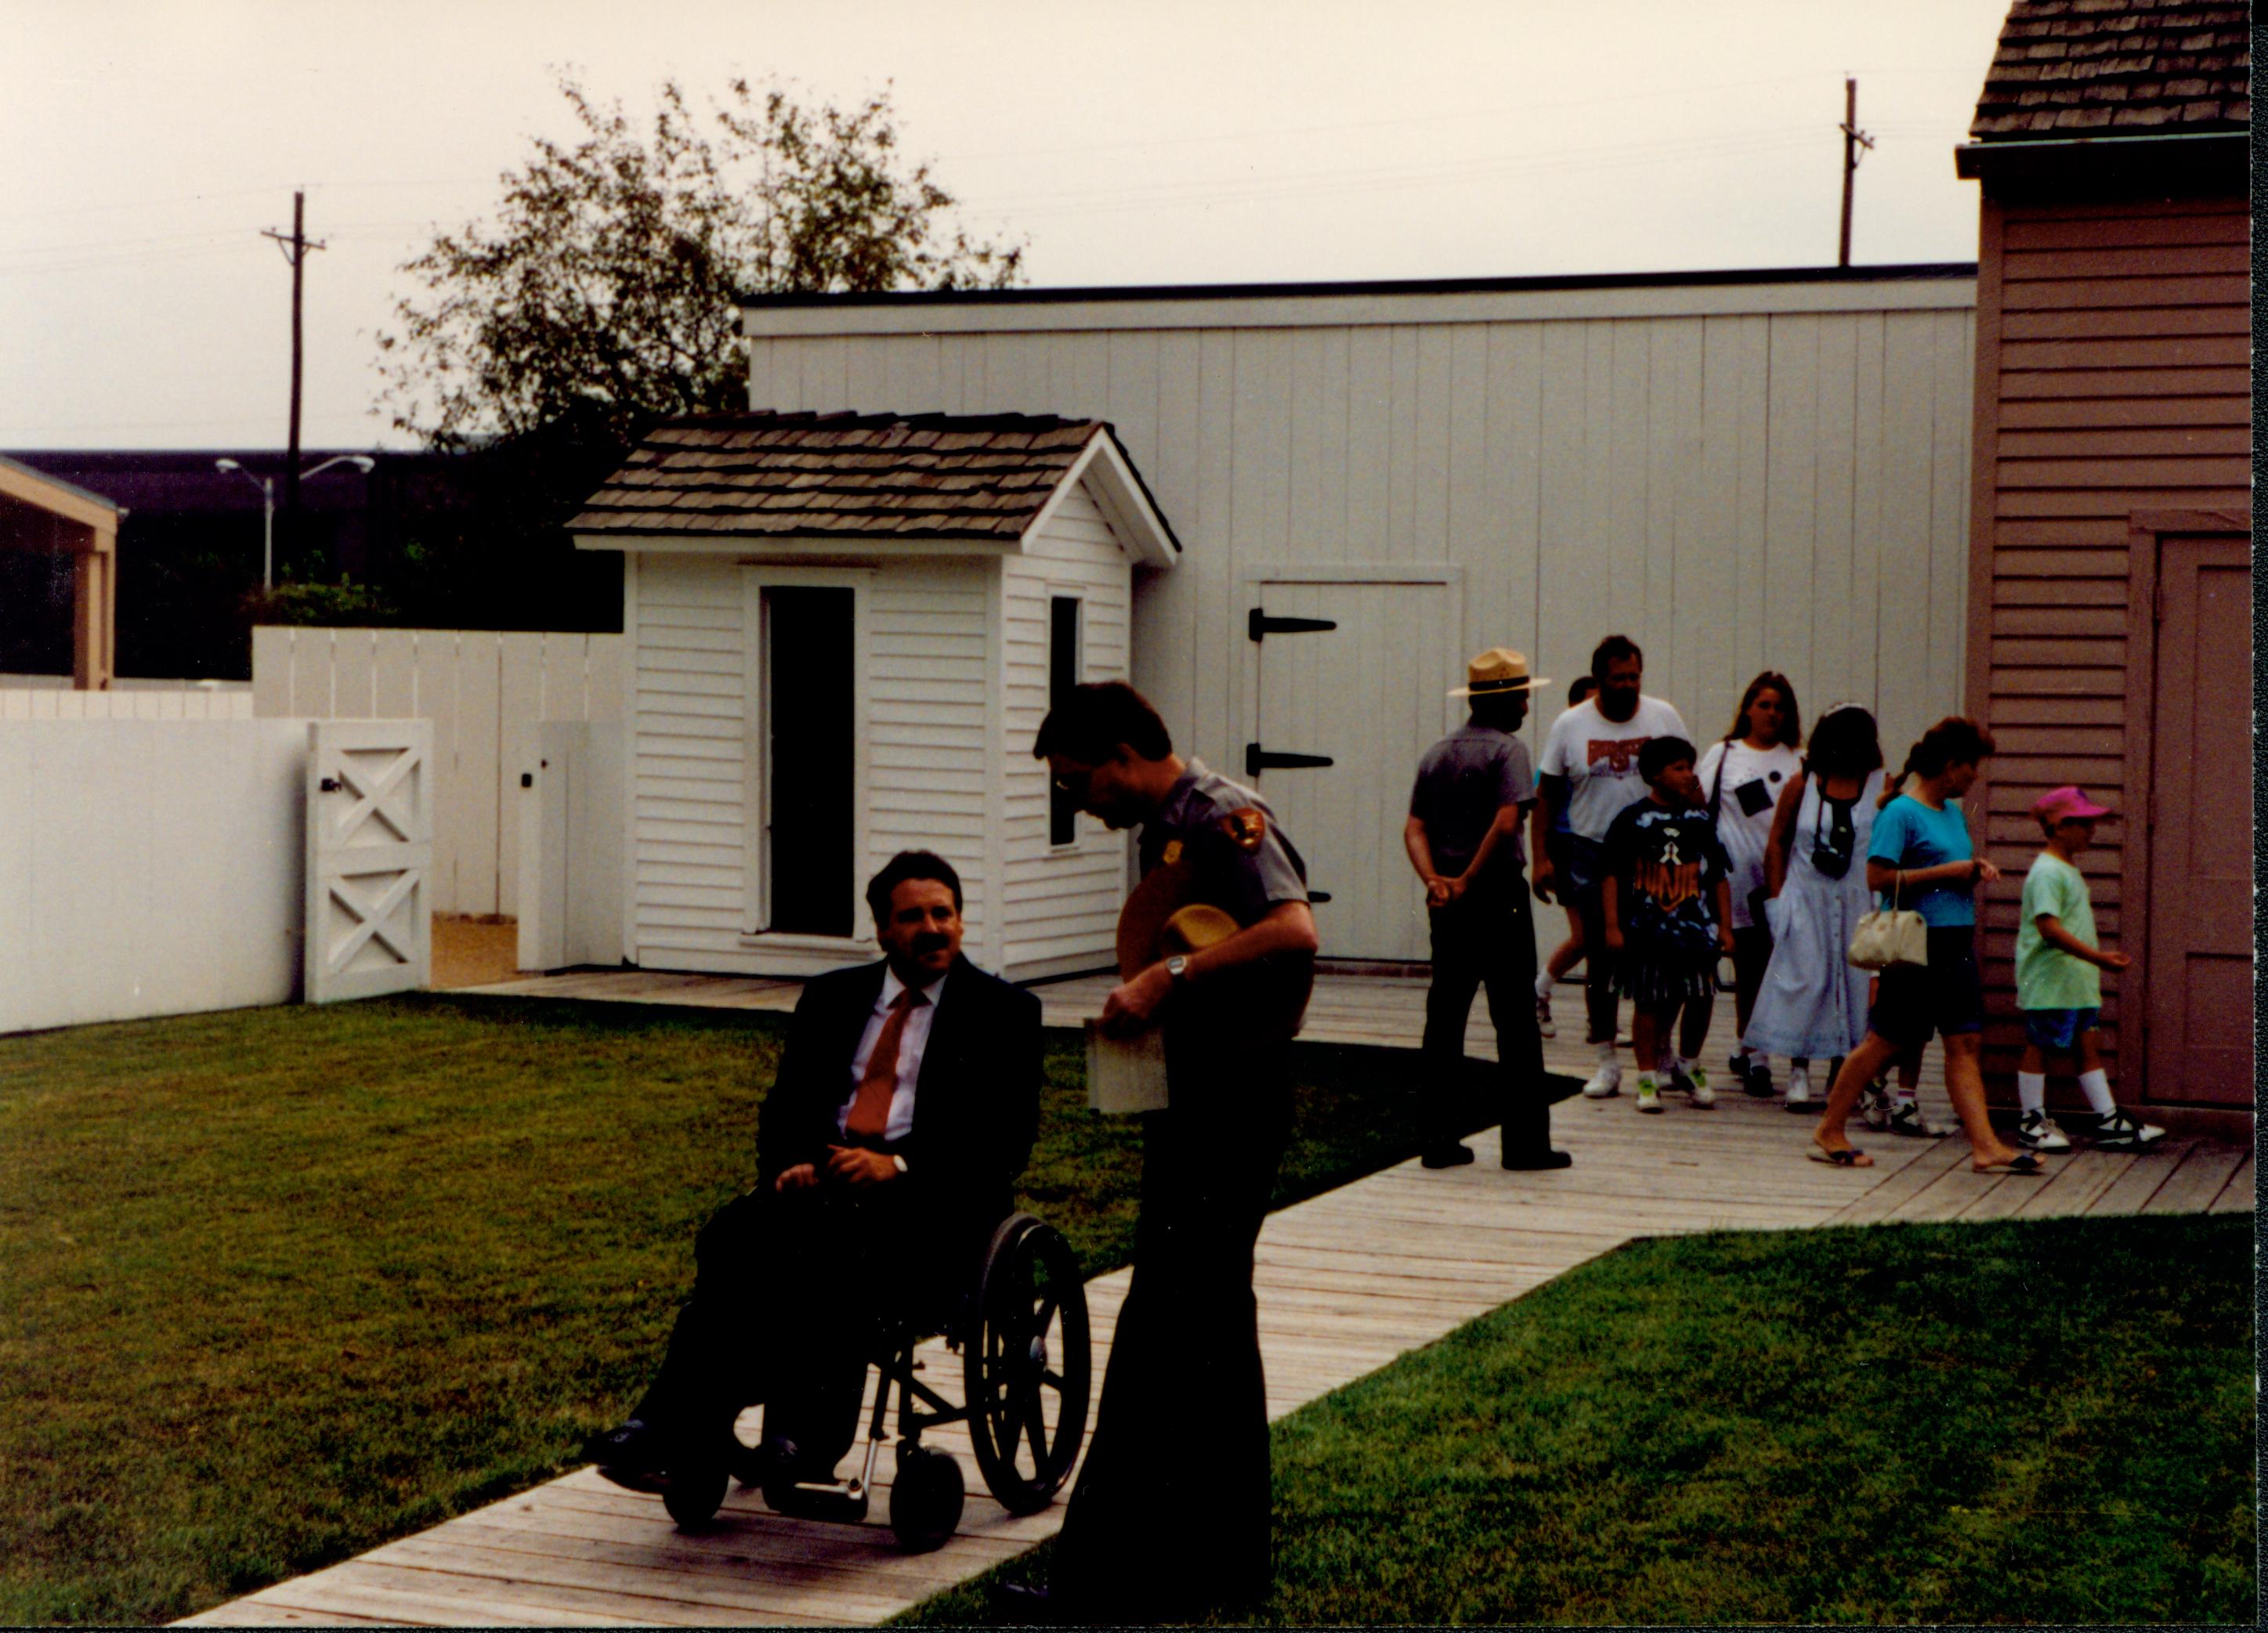 A man in a wheelchair waits on the Lincoln home back yard boardwalk while chatting with a Lincoln Home staff member. Visitors in the background. Photographer facing north east.